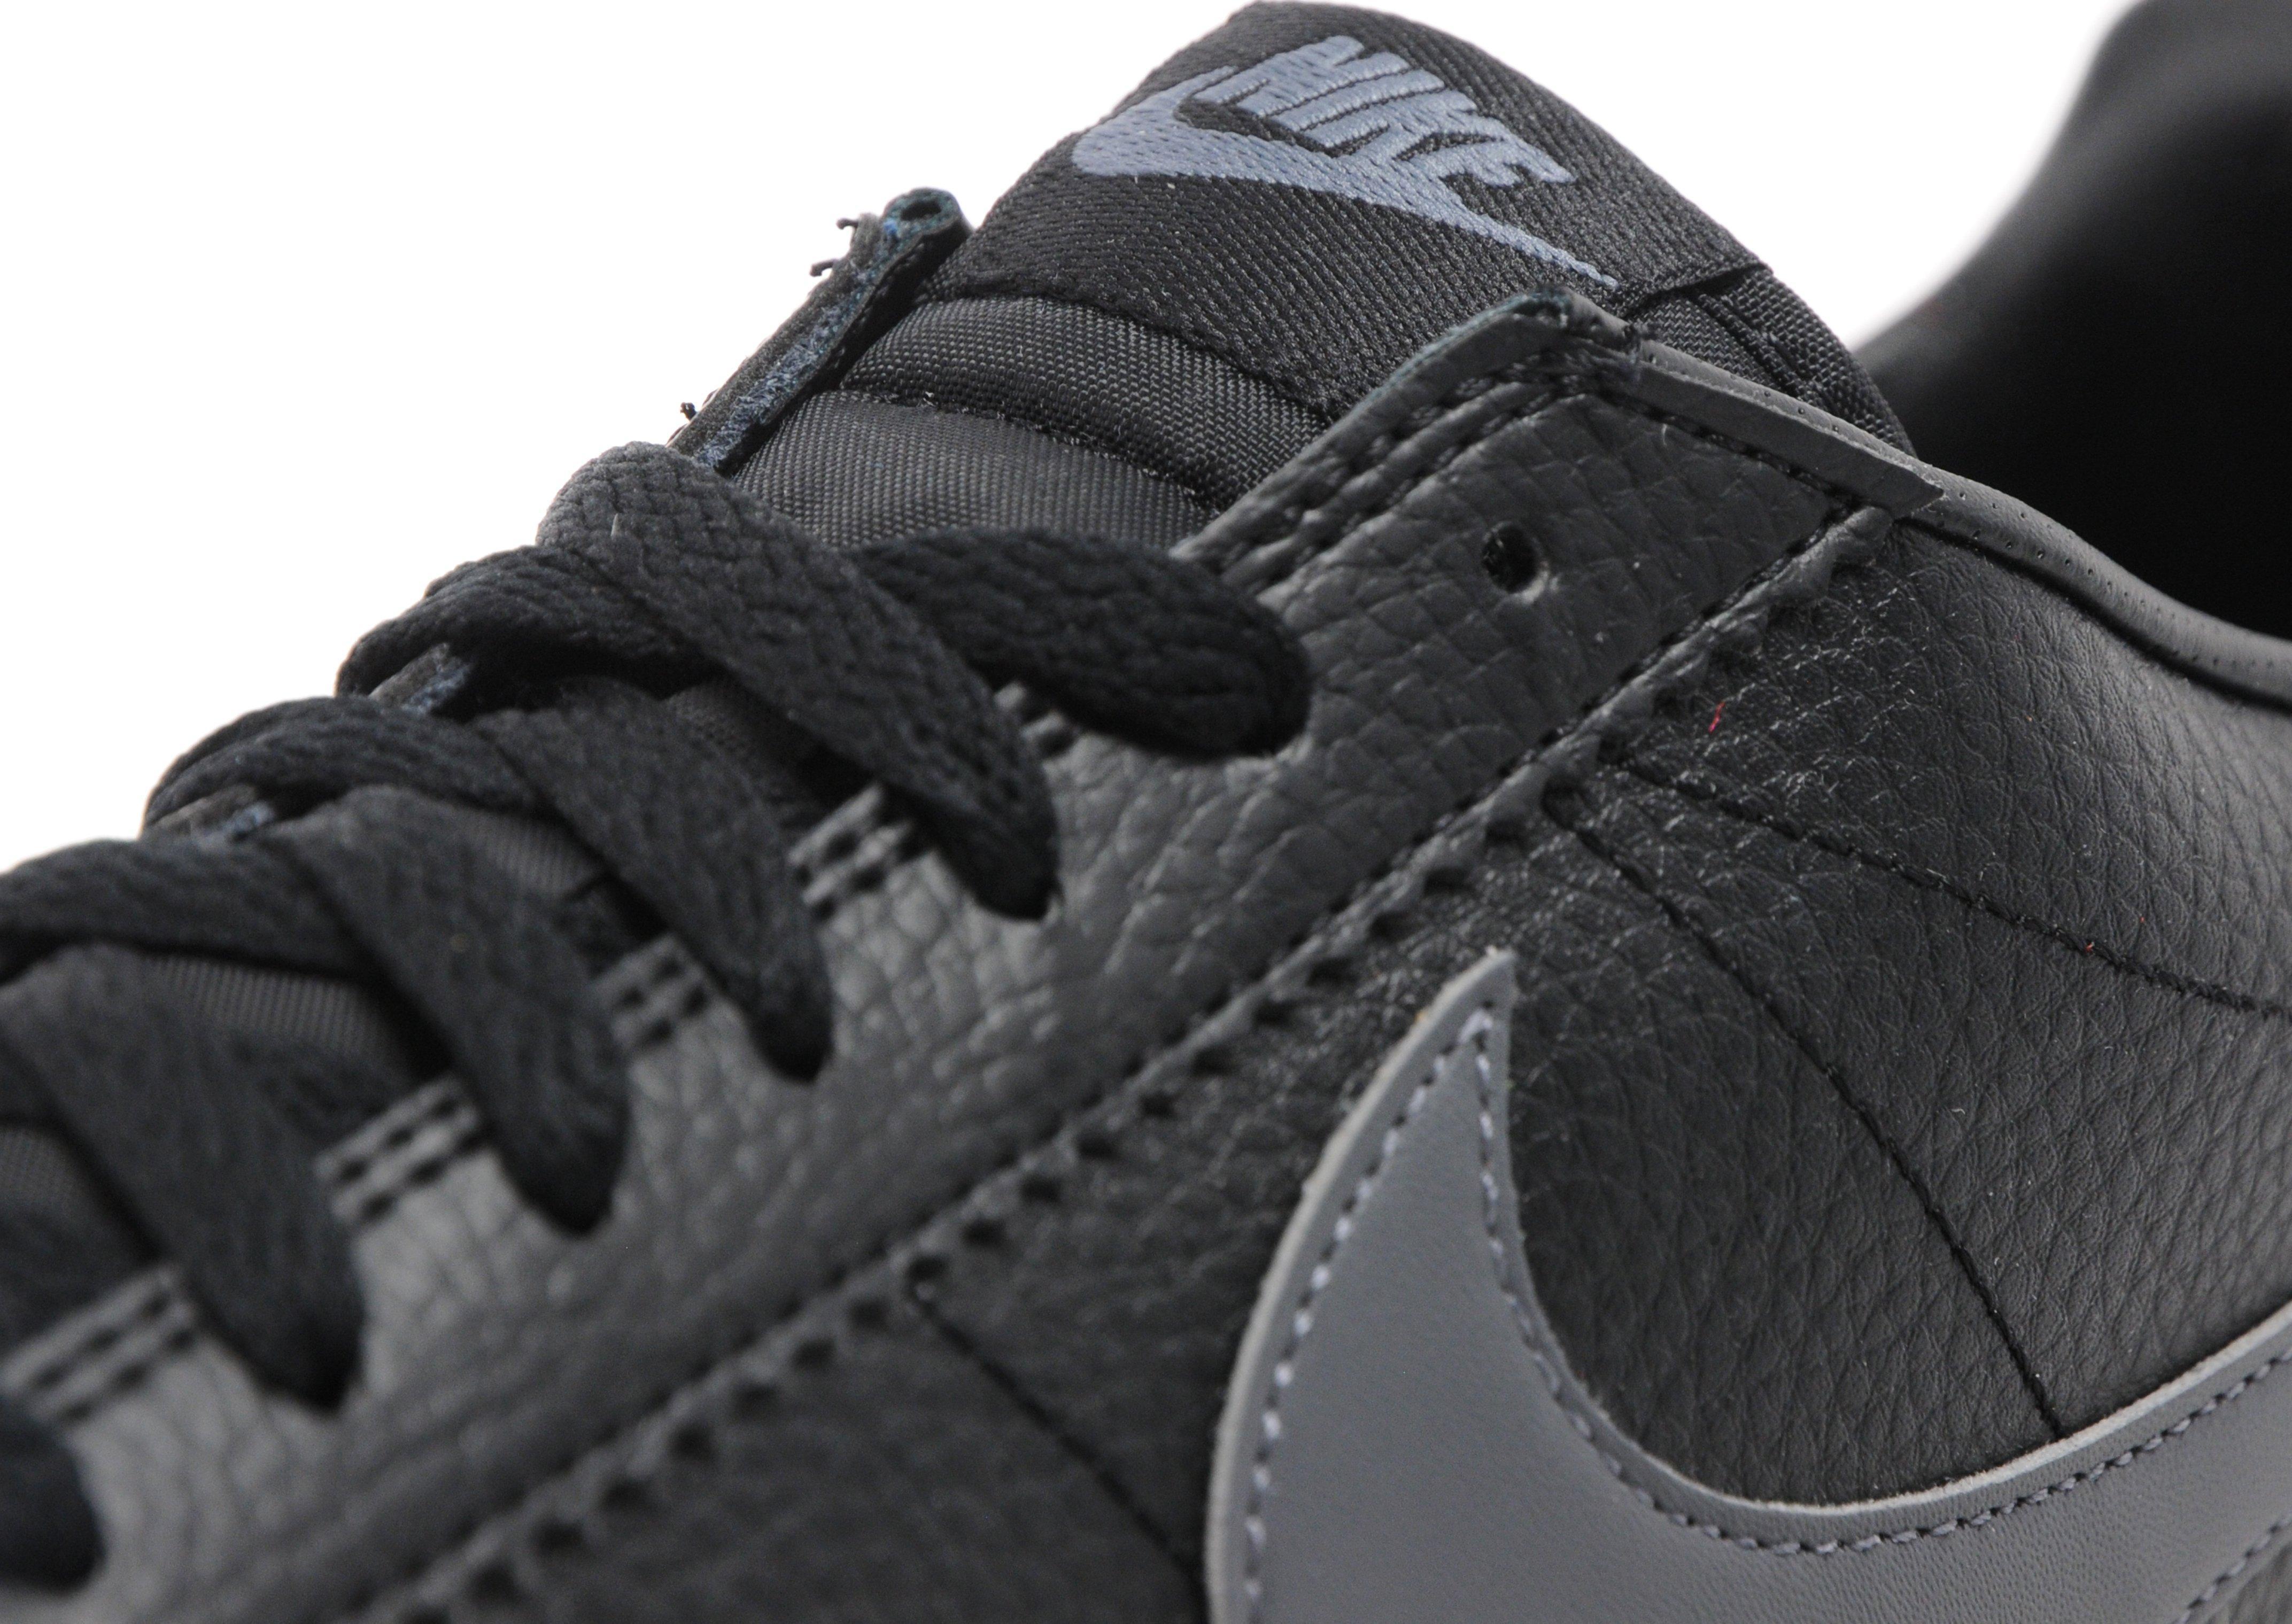 Nike Classic Cortez Leather in Black for Men - Lyst